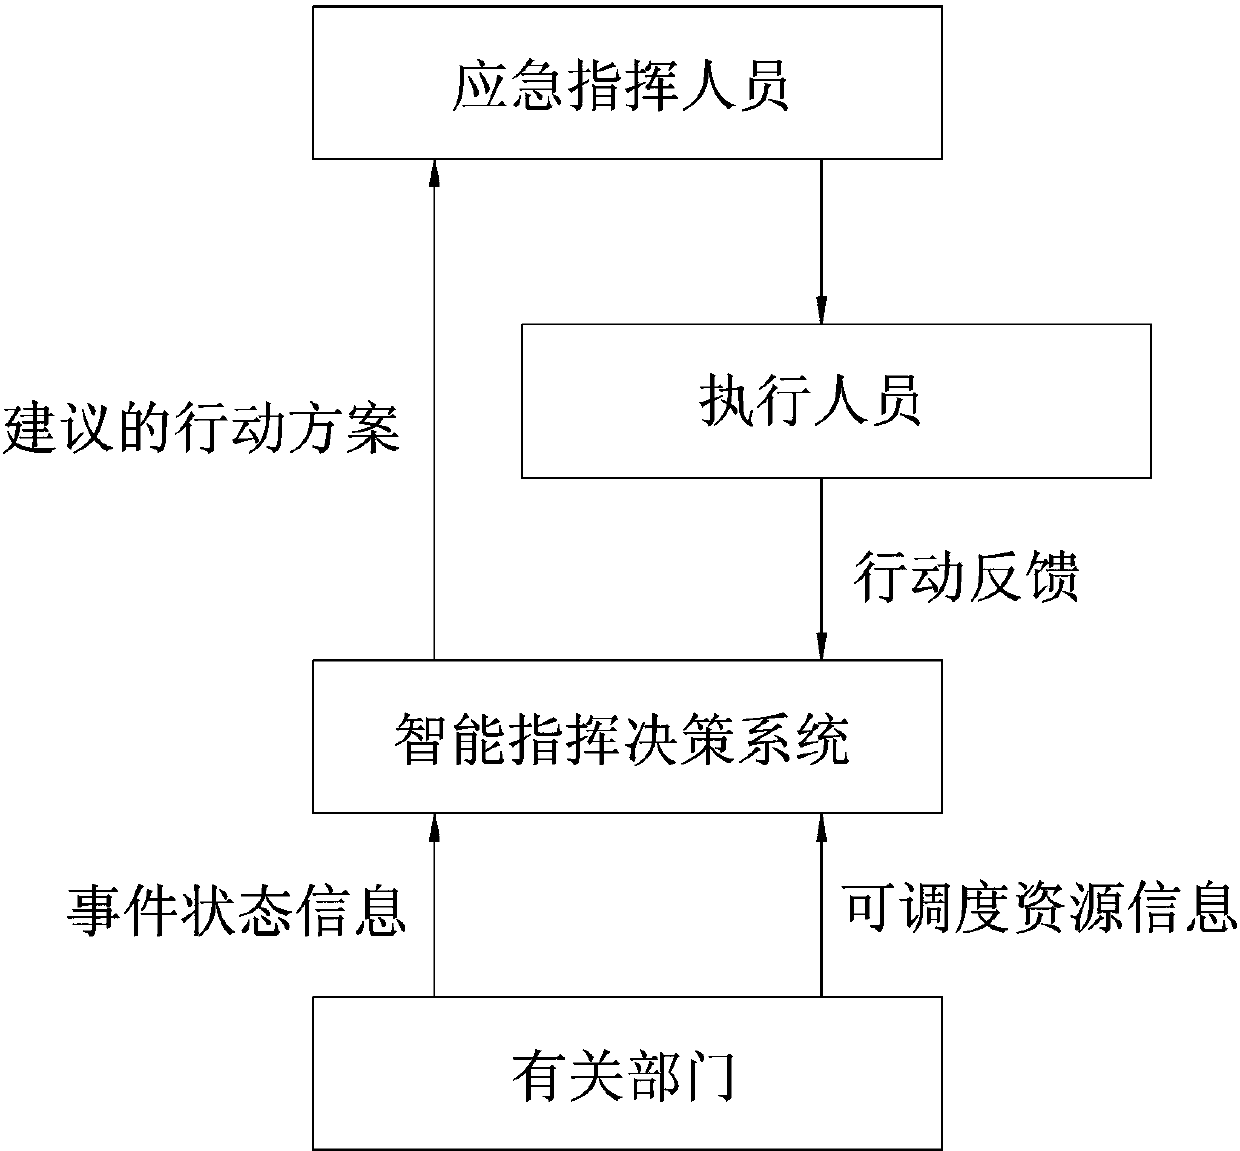 3G (3rd generation) based public safety emergency command decision-making system and implementation method thereof